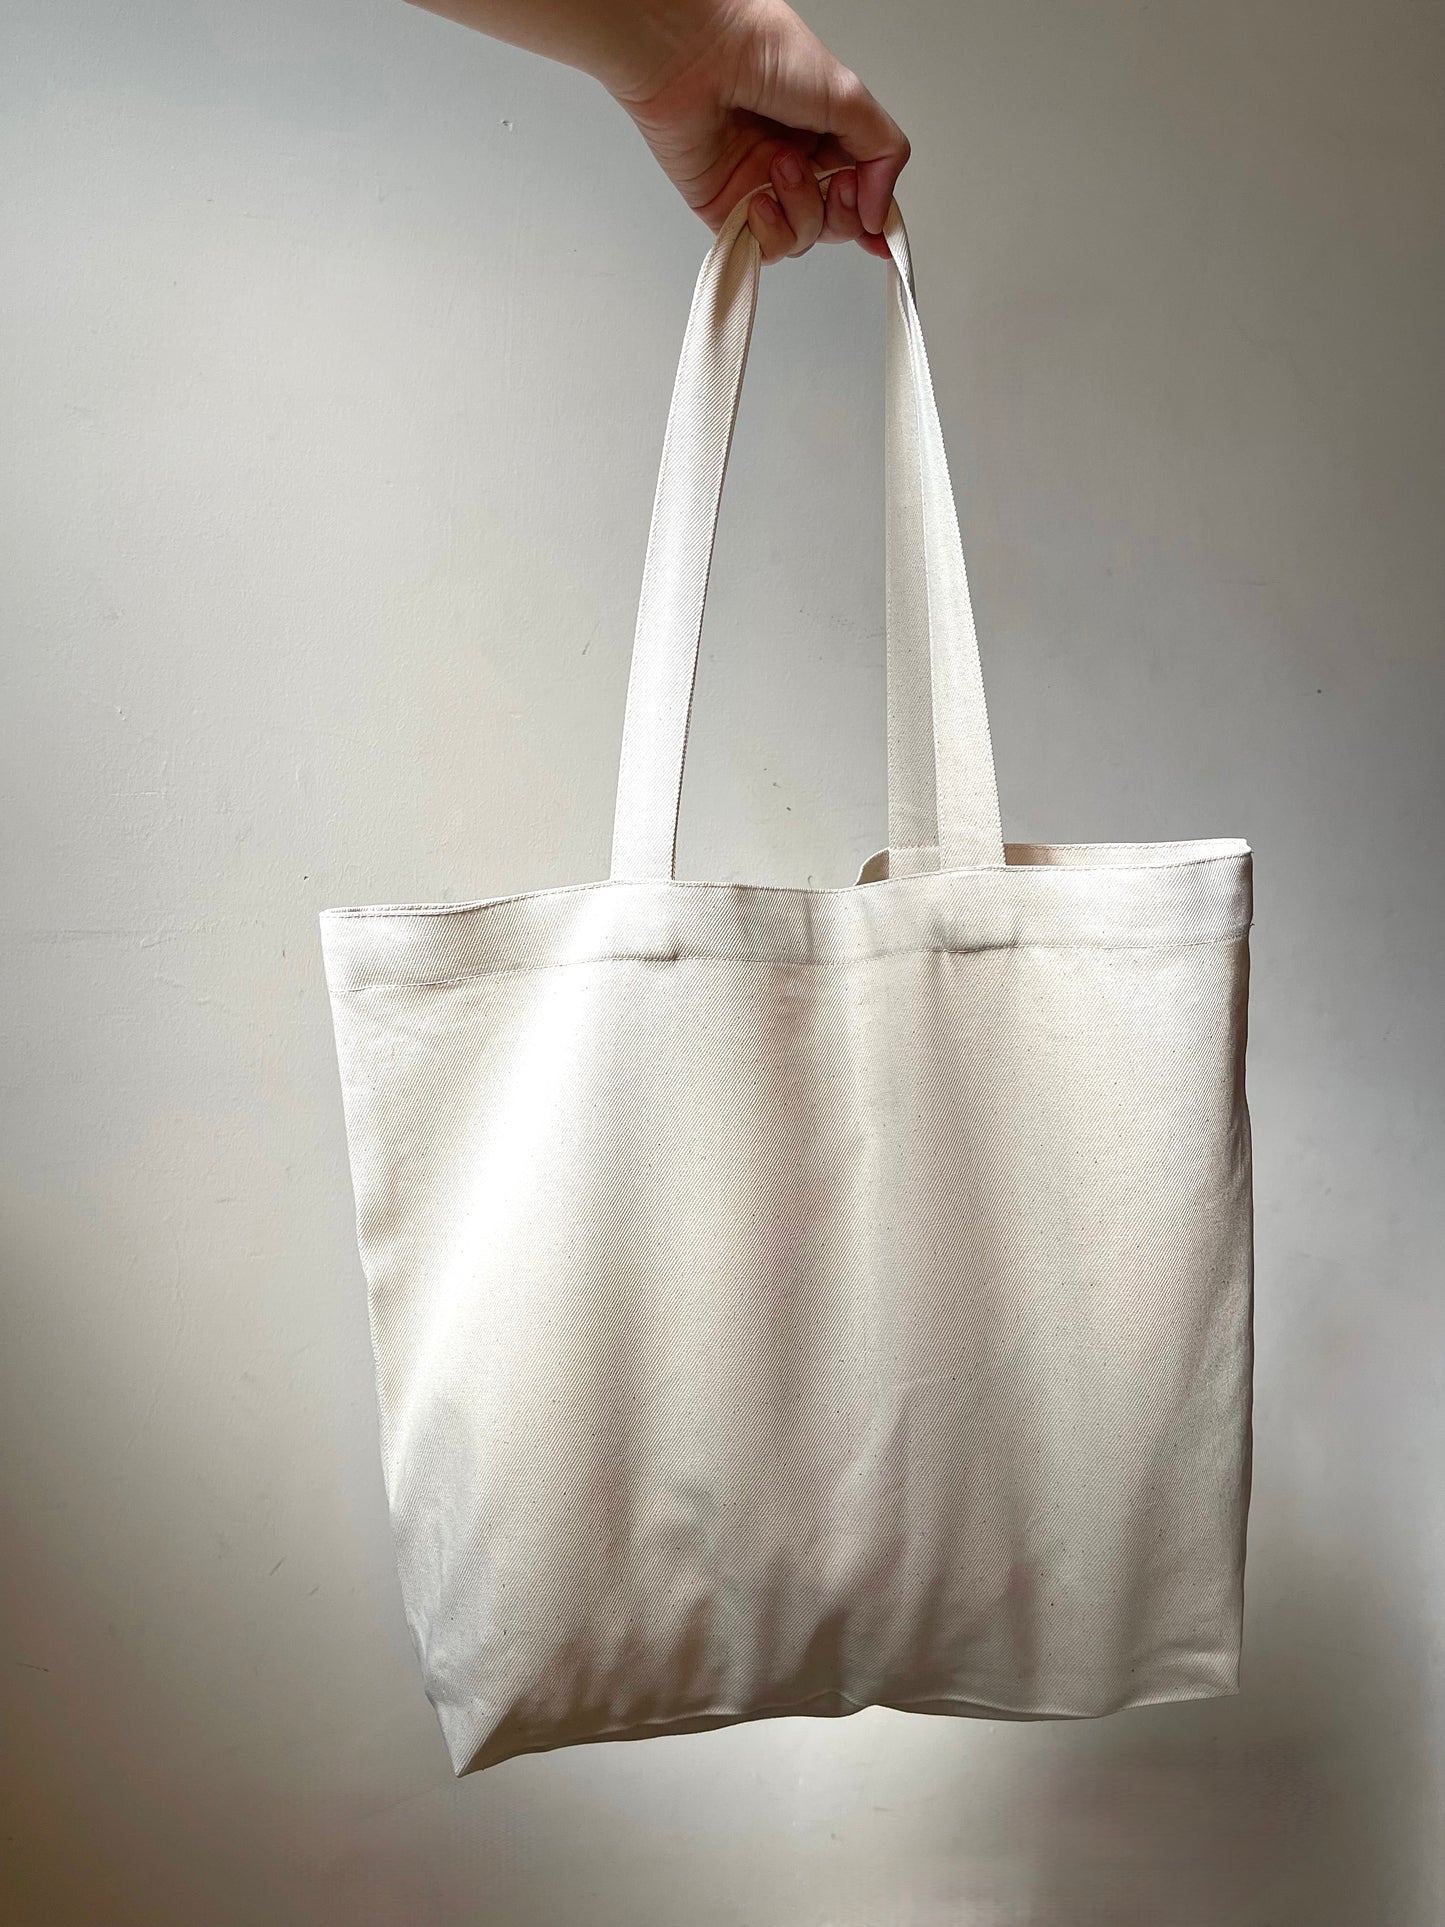 The Carryall